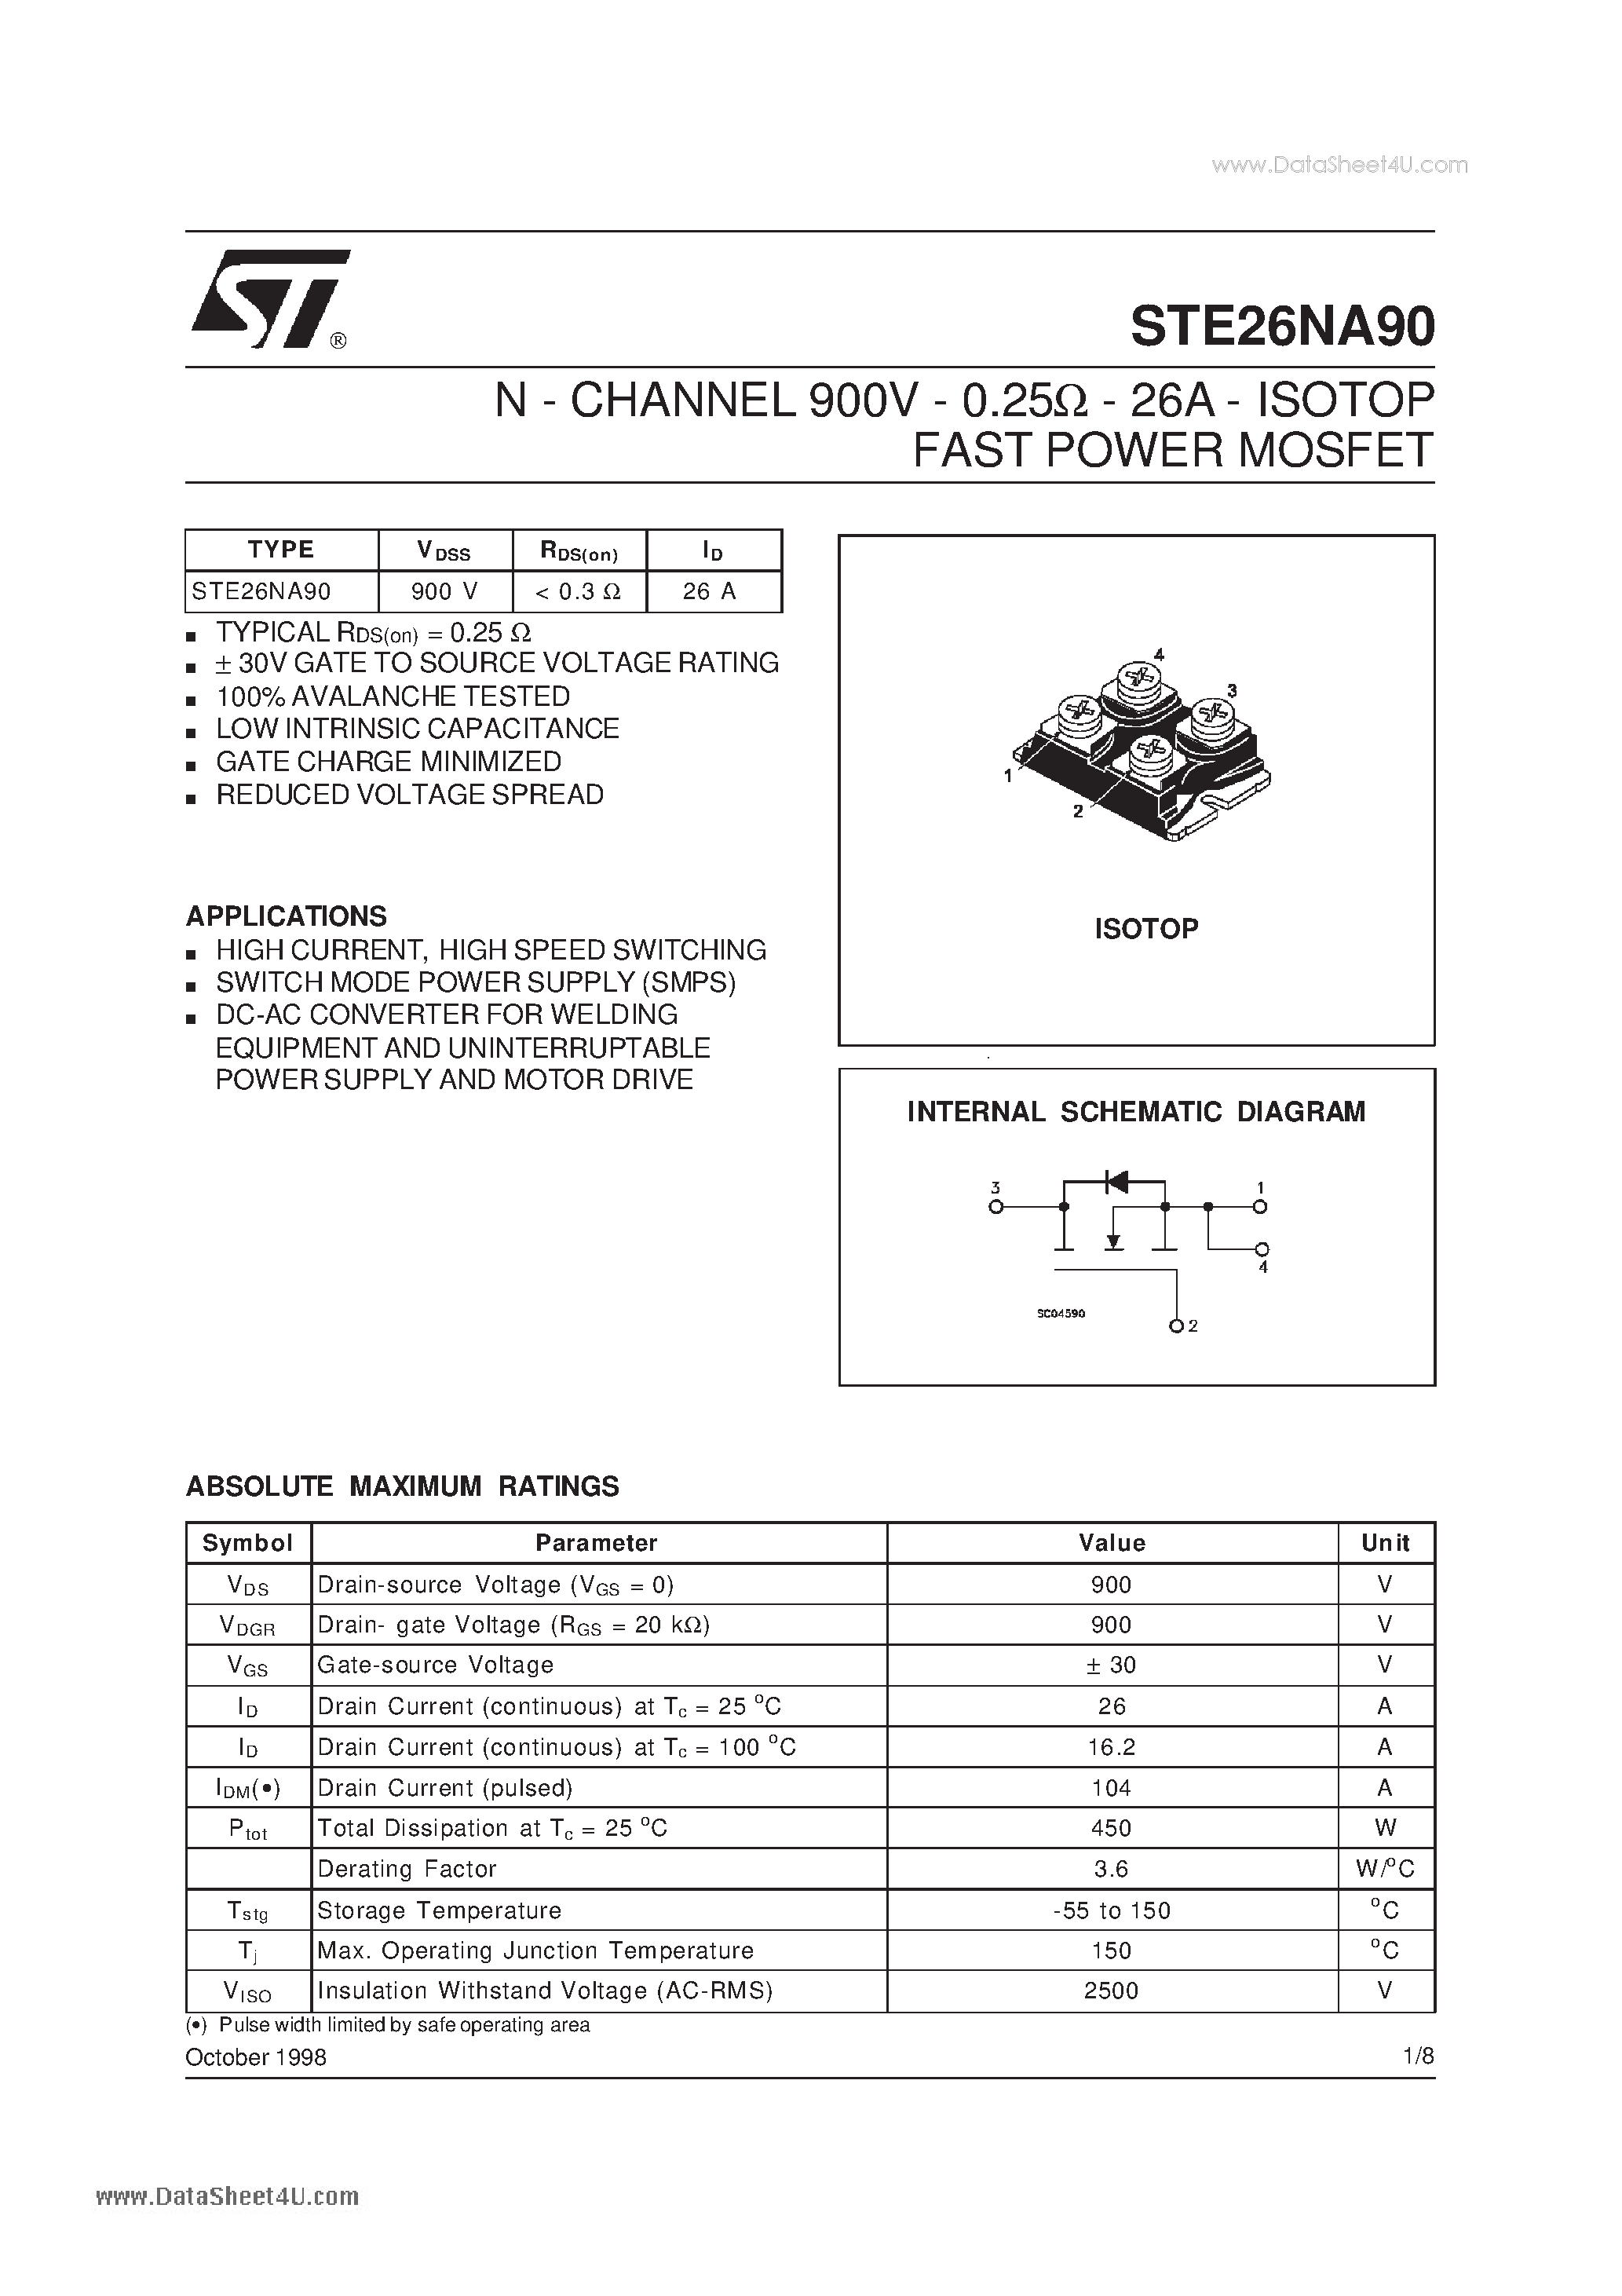 Datasheet STE26NA90 - ISOTOP FAST POWER MOSFET page 1